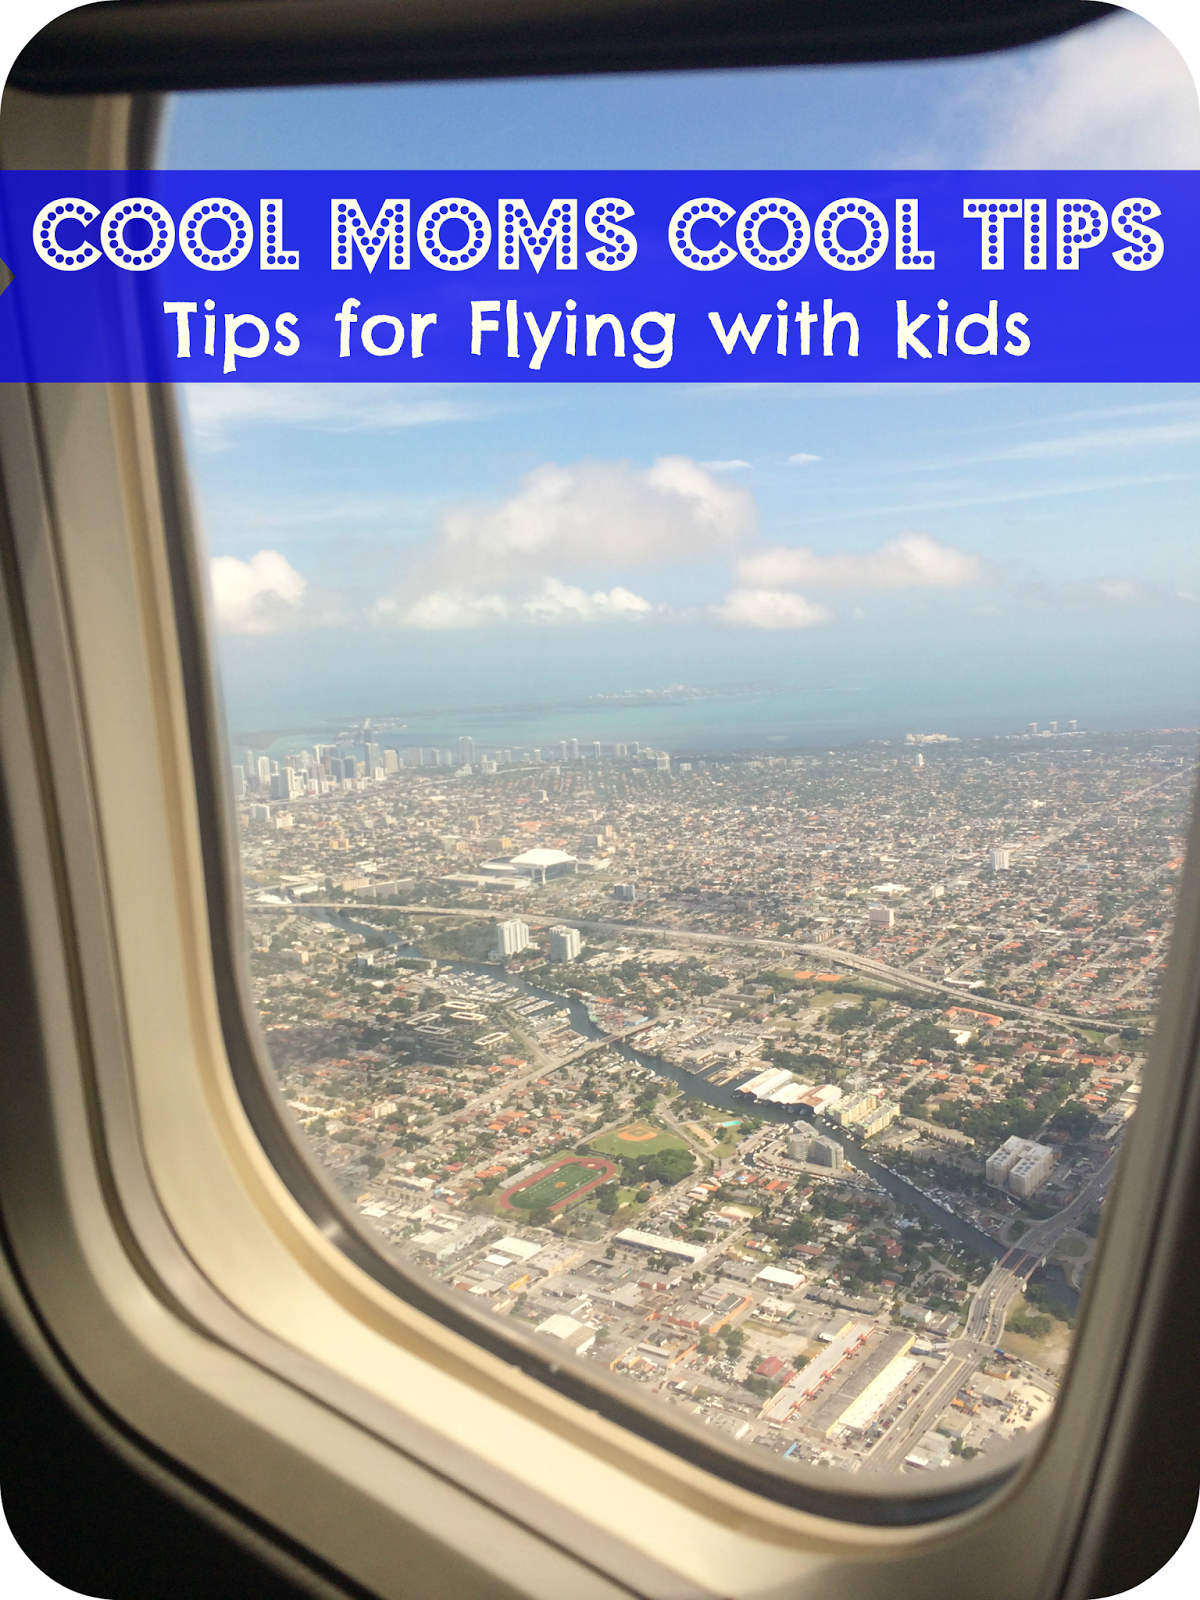 cool moms cool tips #summerconbritax tips for flying with children look out the window